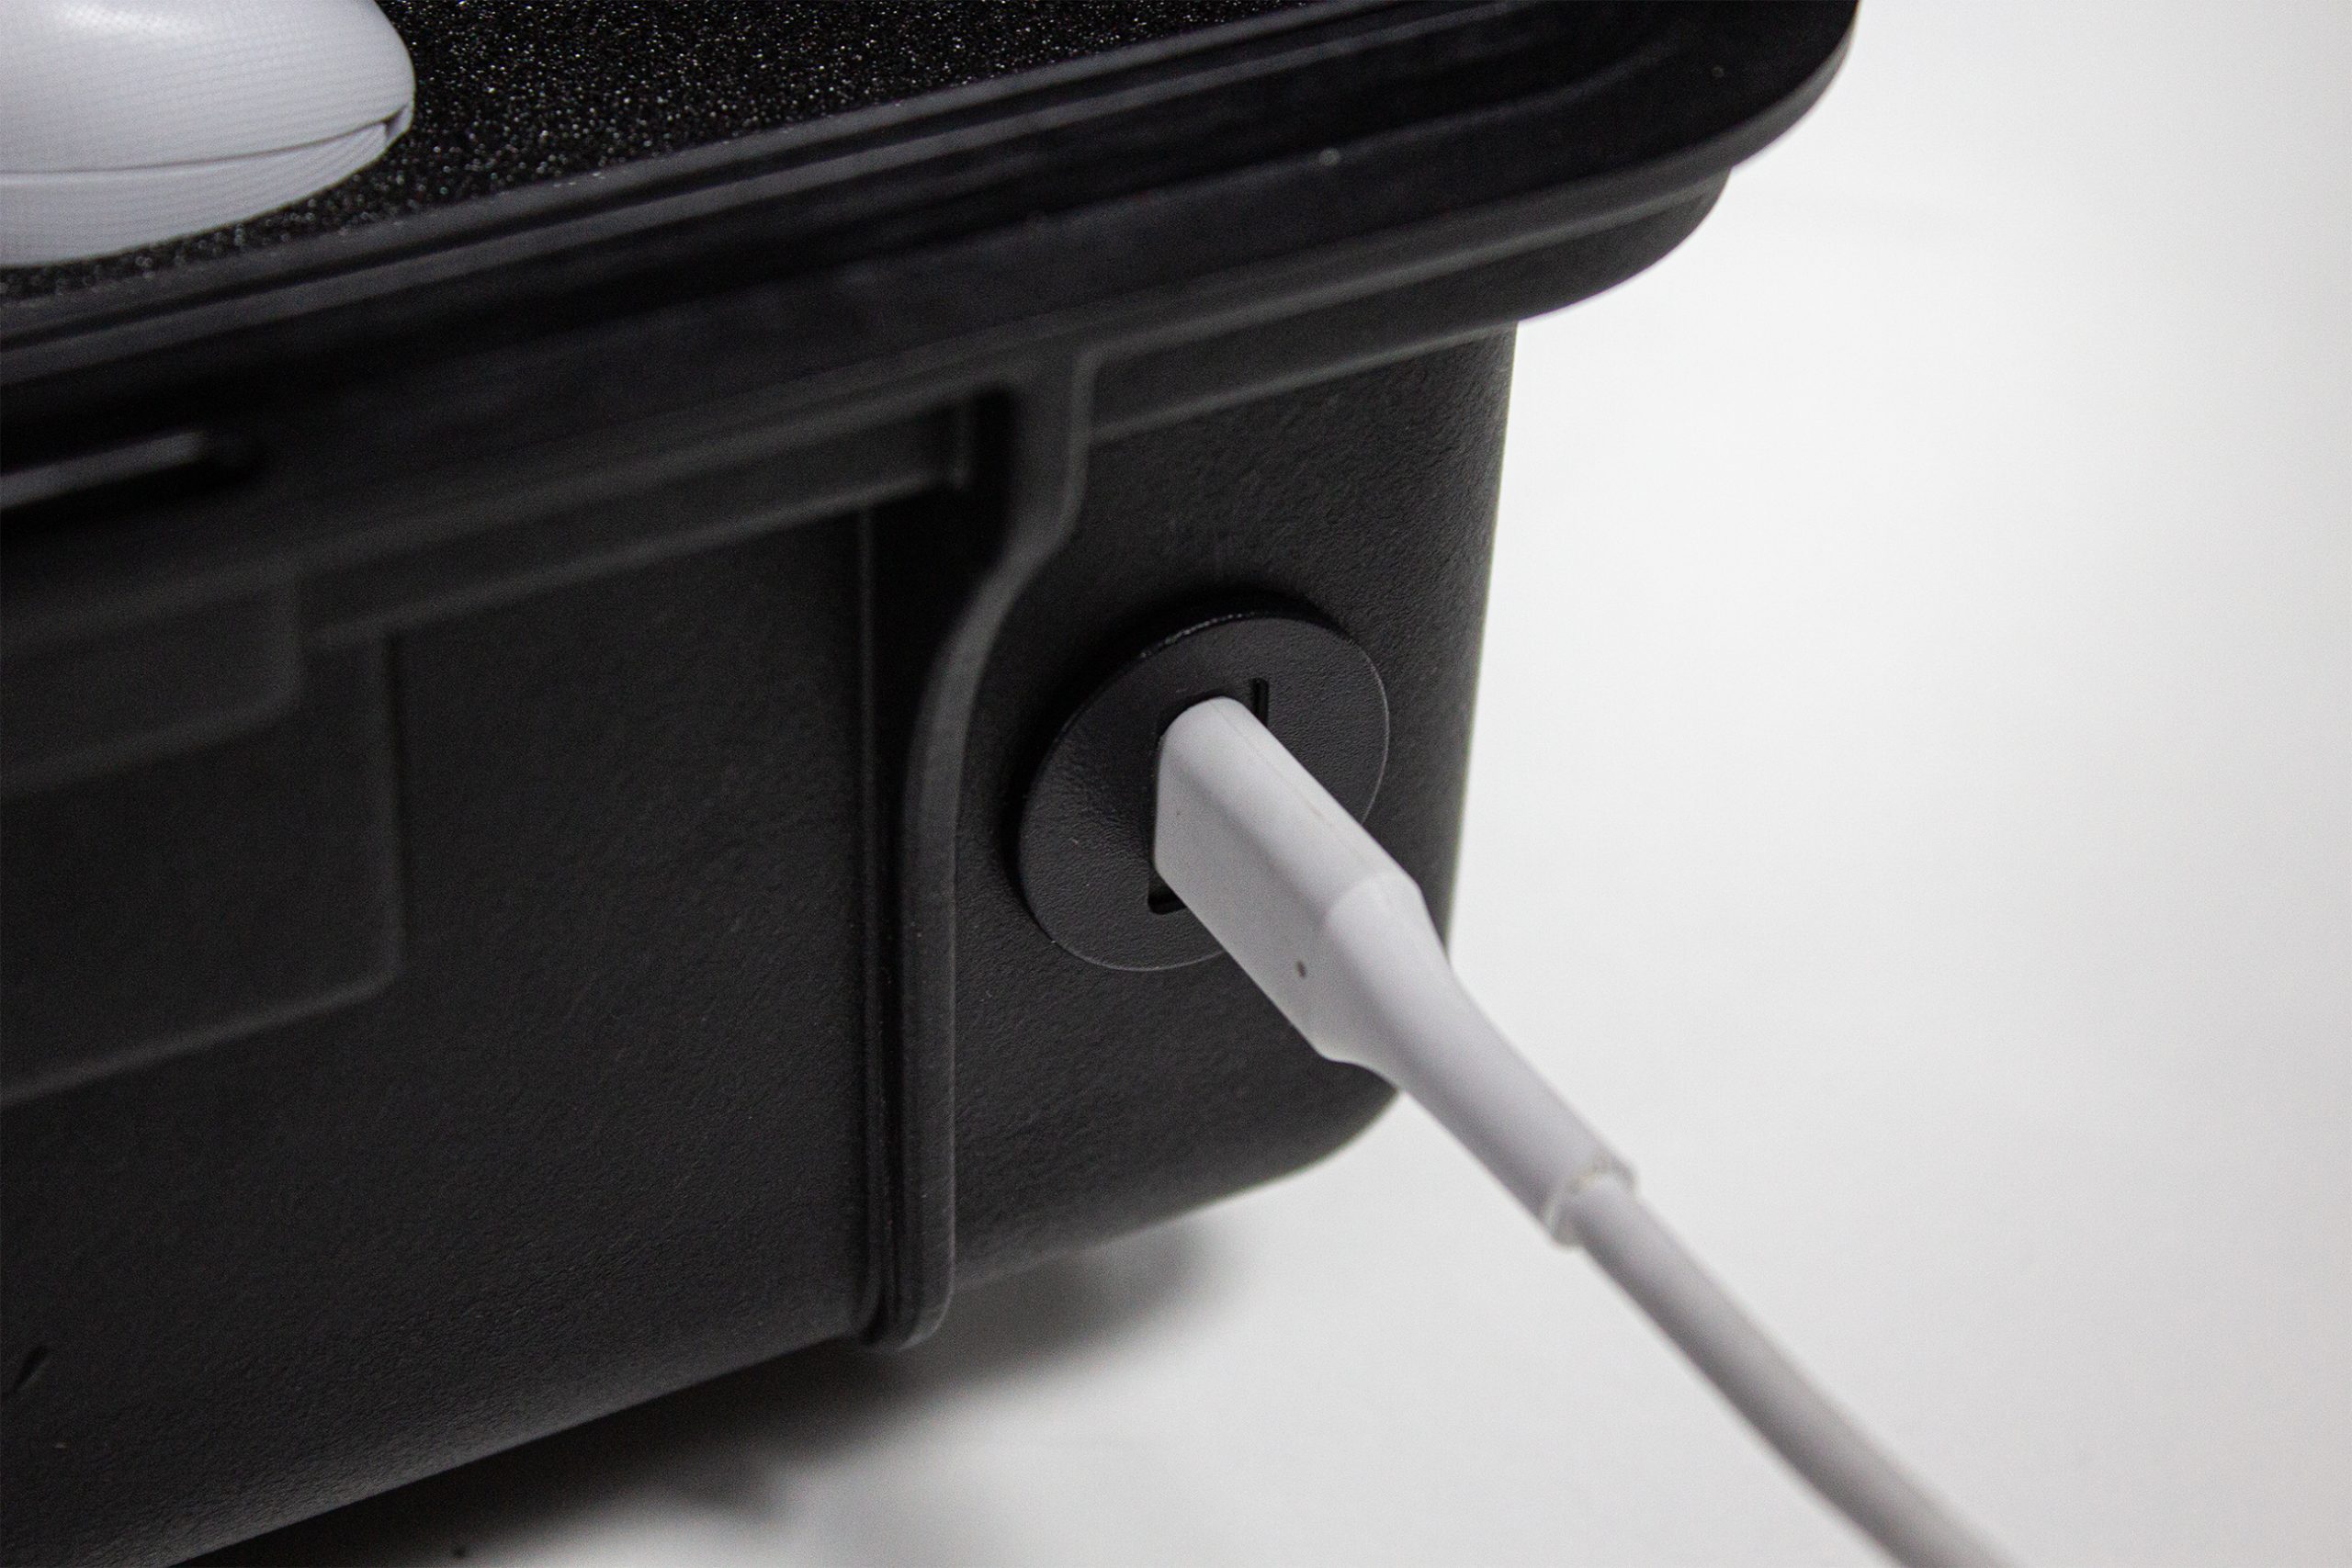 USB-C Charging Port on our Single User Neo3 Case